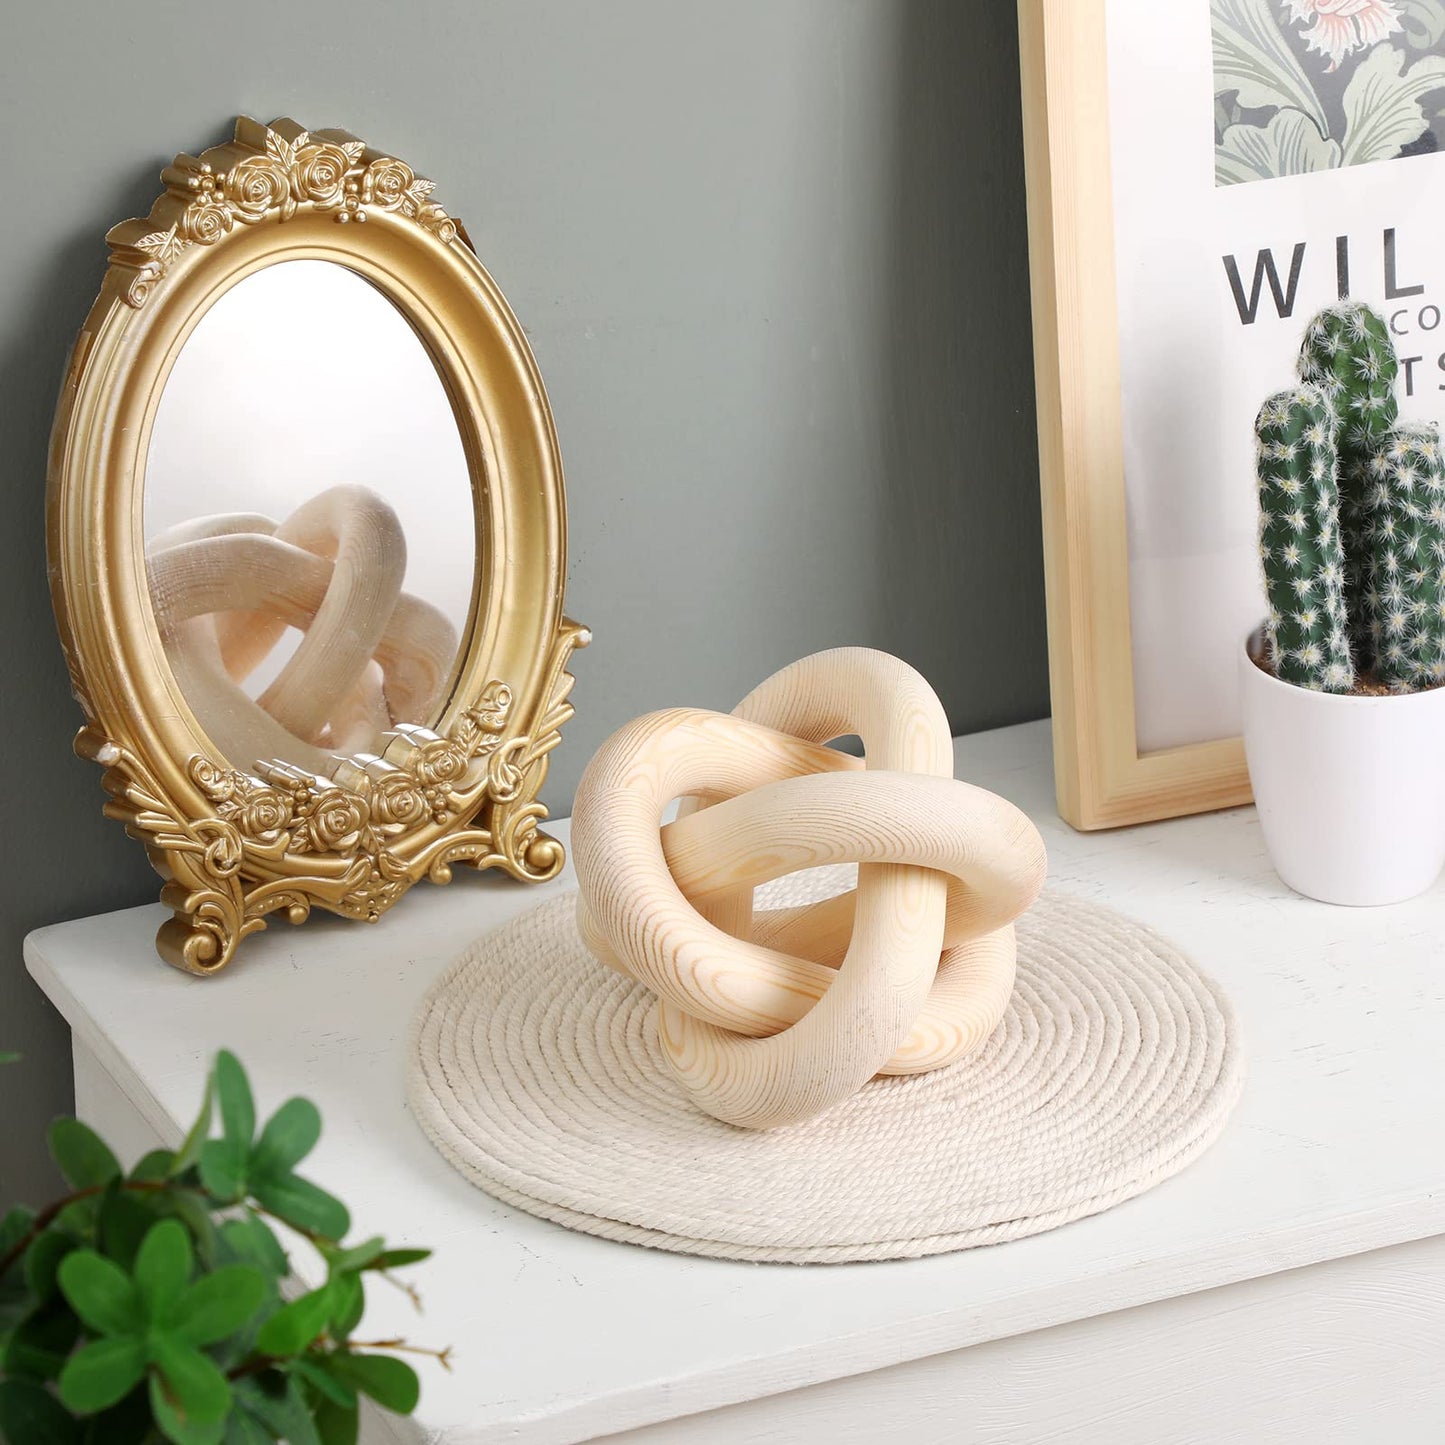 Wood Chain Link Decor 3 Link Wood Knot | Sustainable Home Decor